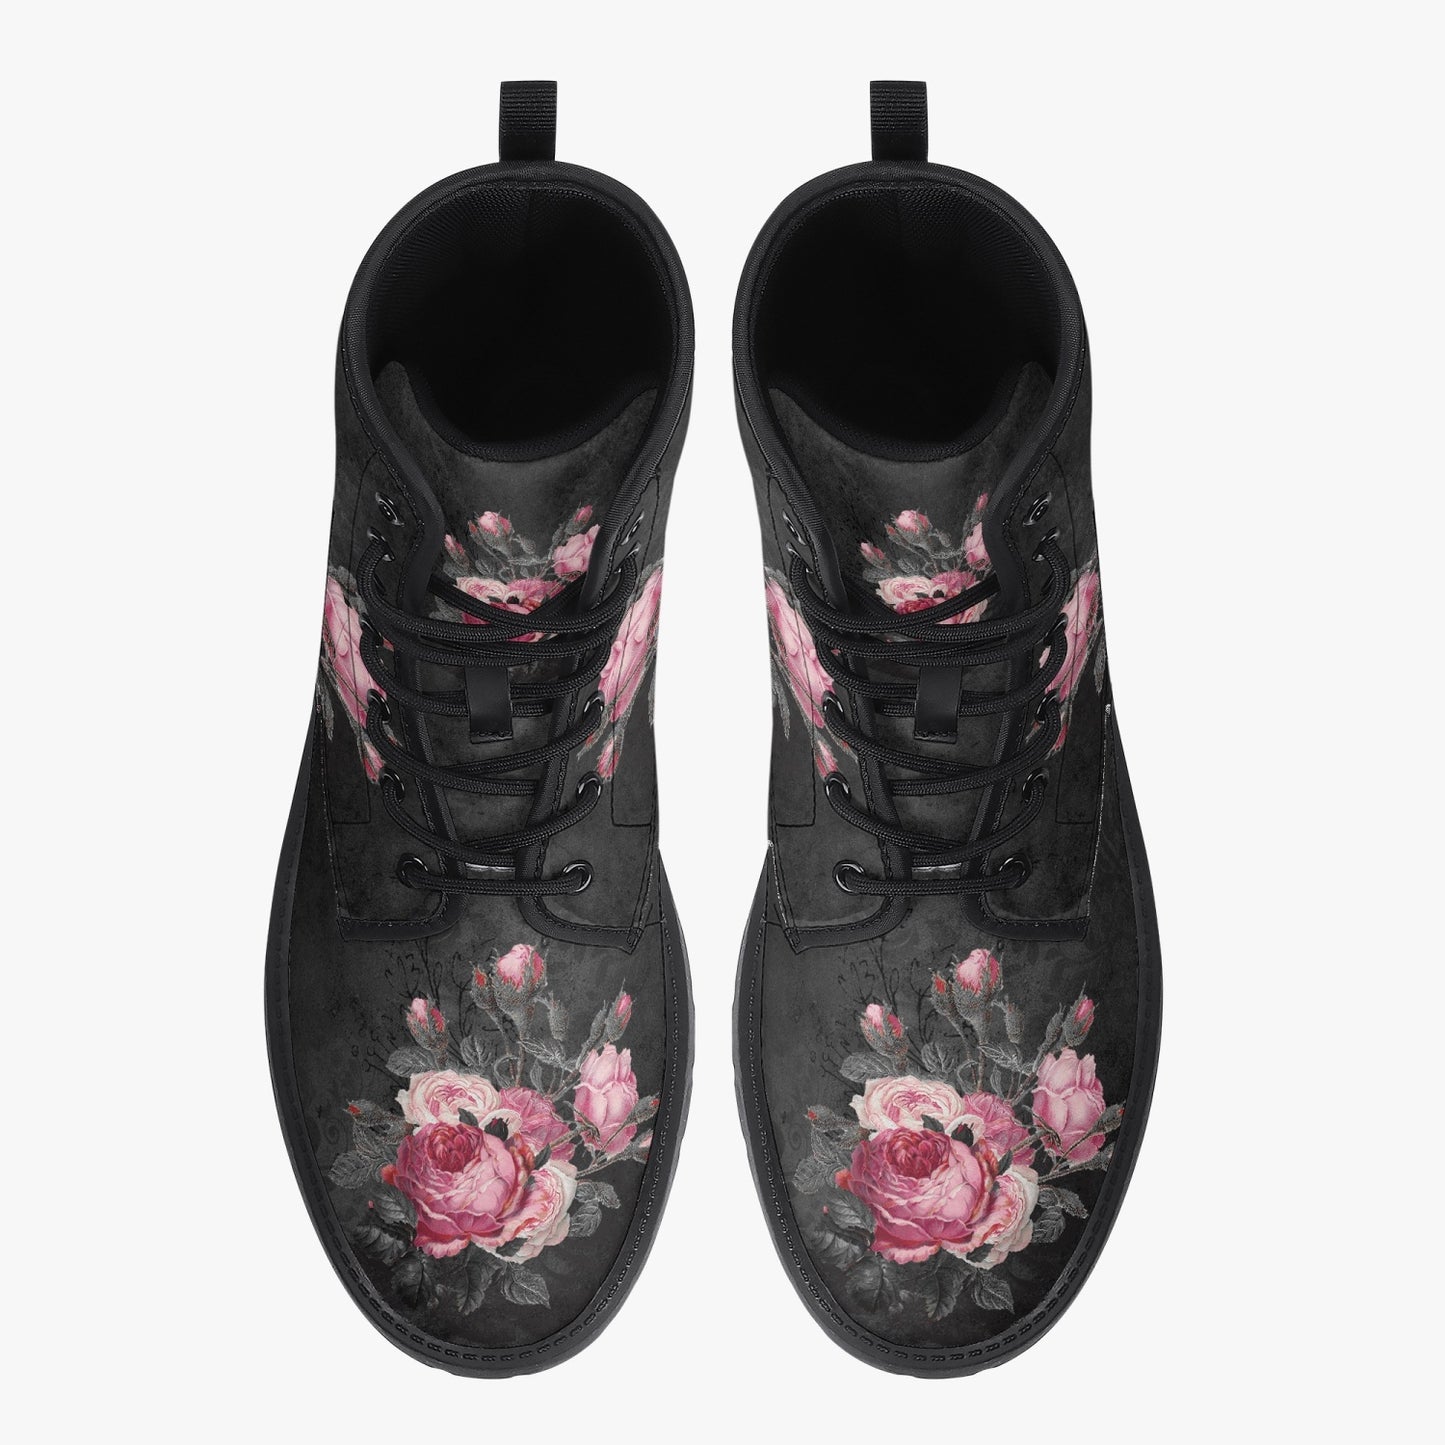 Gothic Pink and Grey Floral Vegan leather Combat Boots - Dark Victorian Roses Boots  (JPREG74)